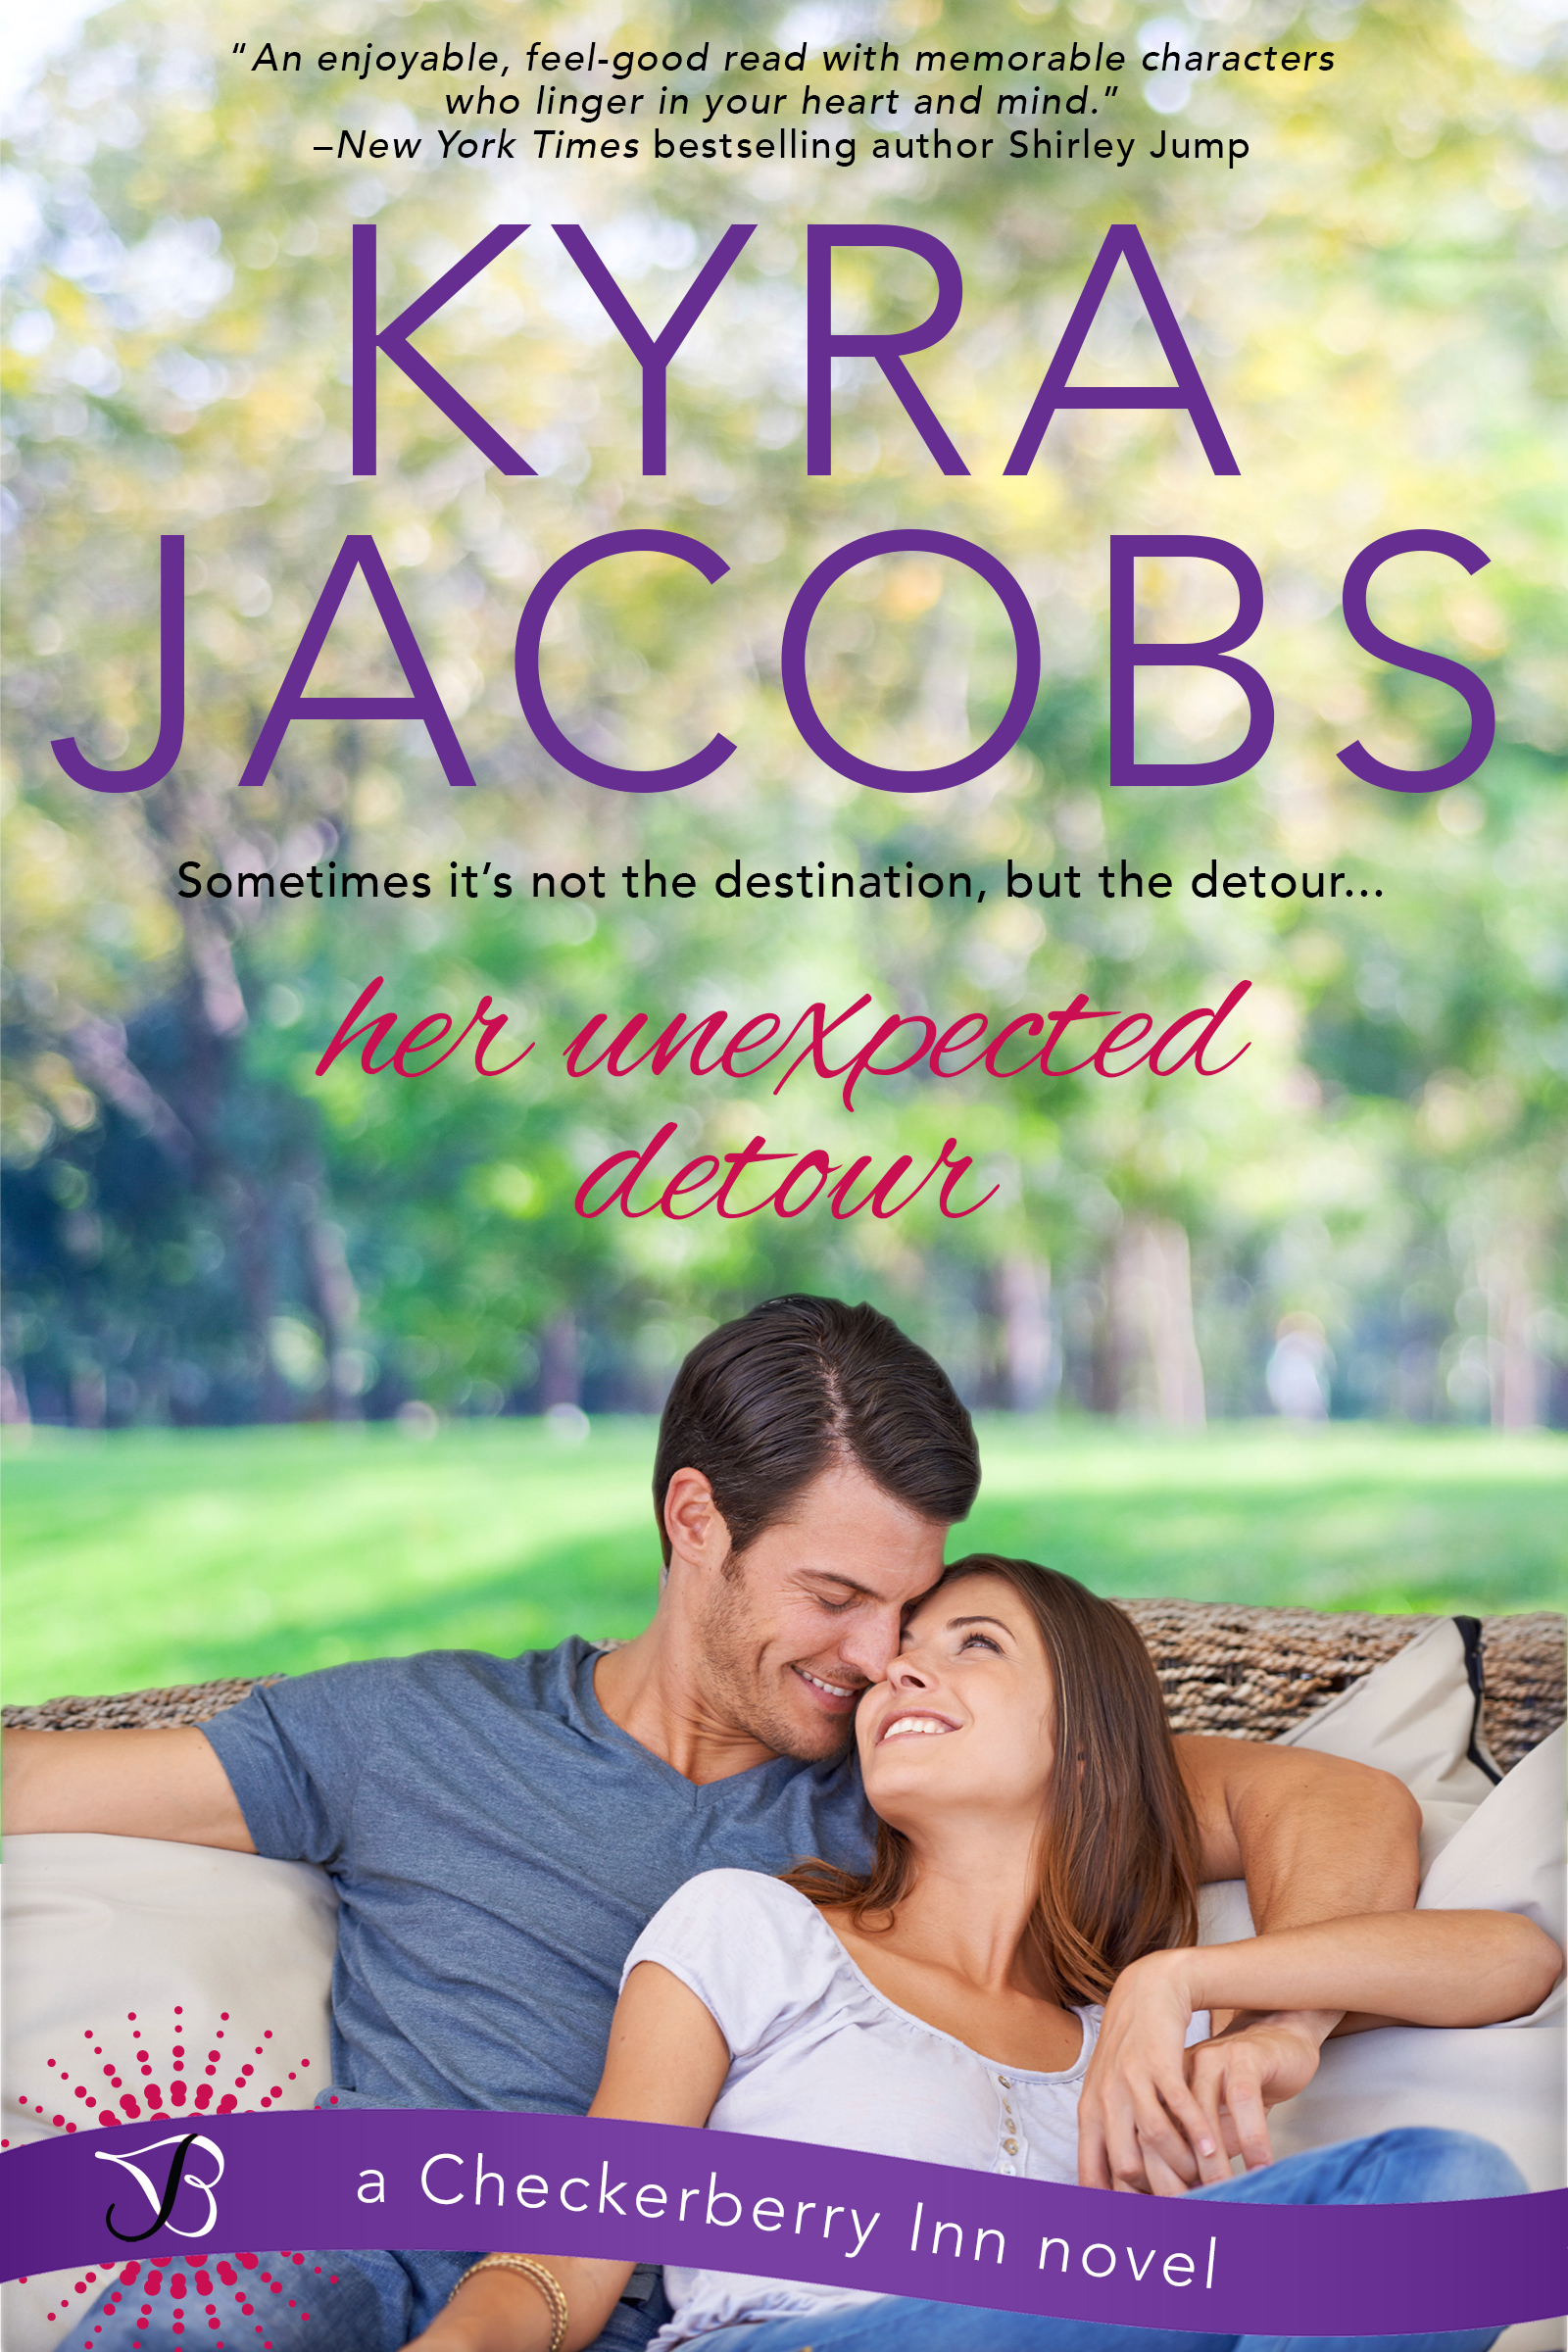 Her Unexpected Detour by Kyra Jacobs